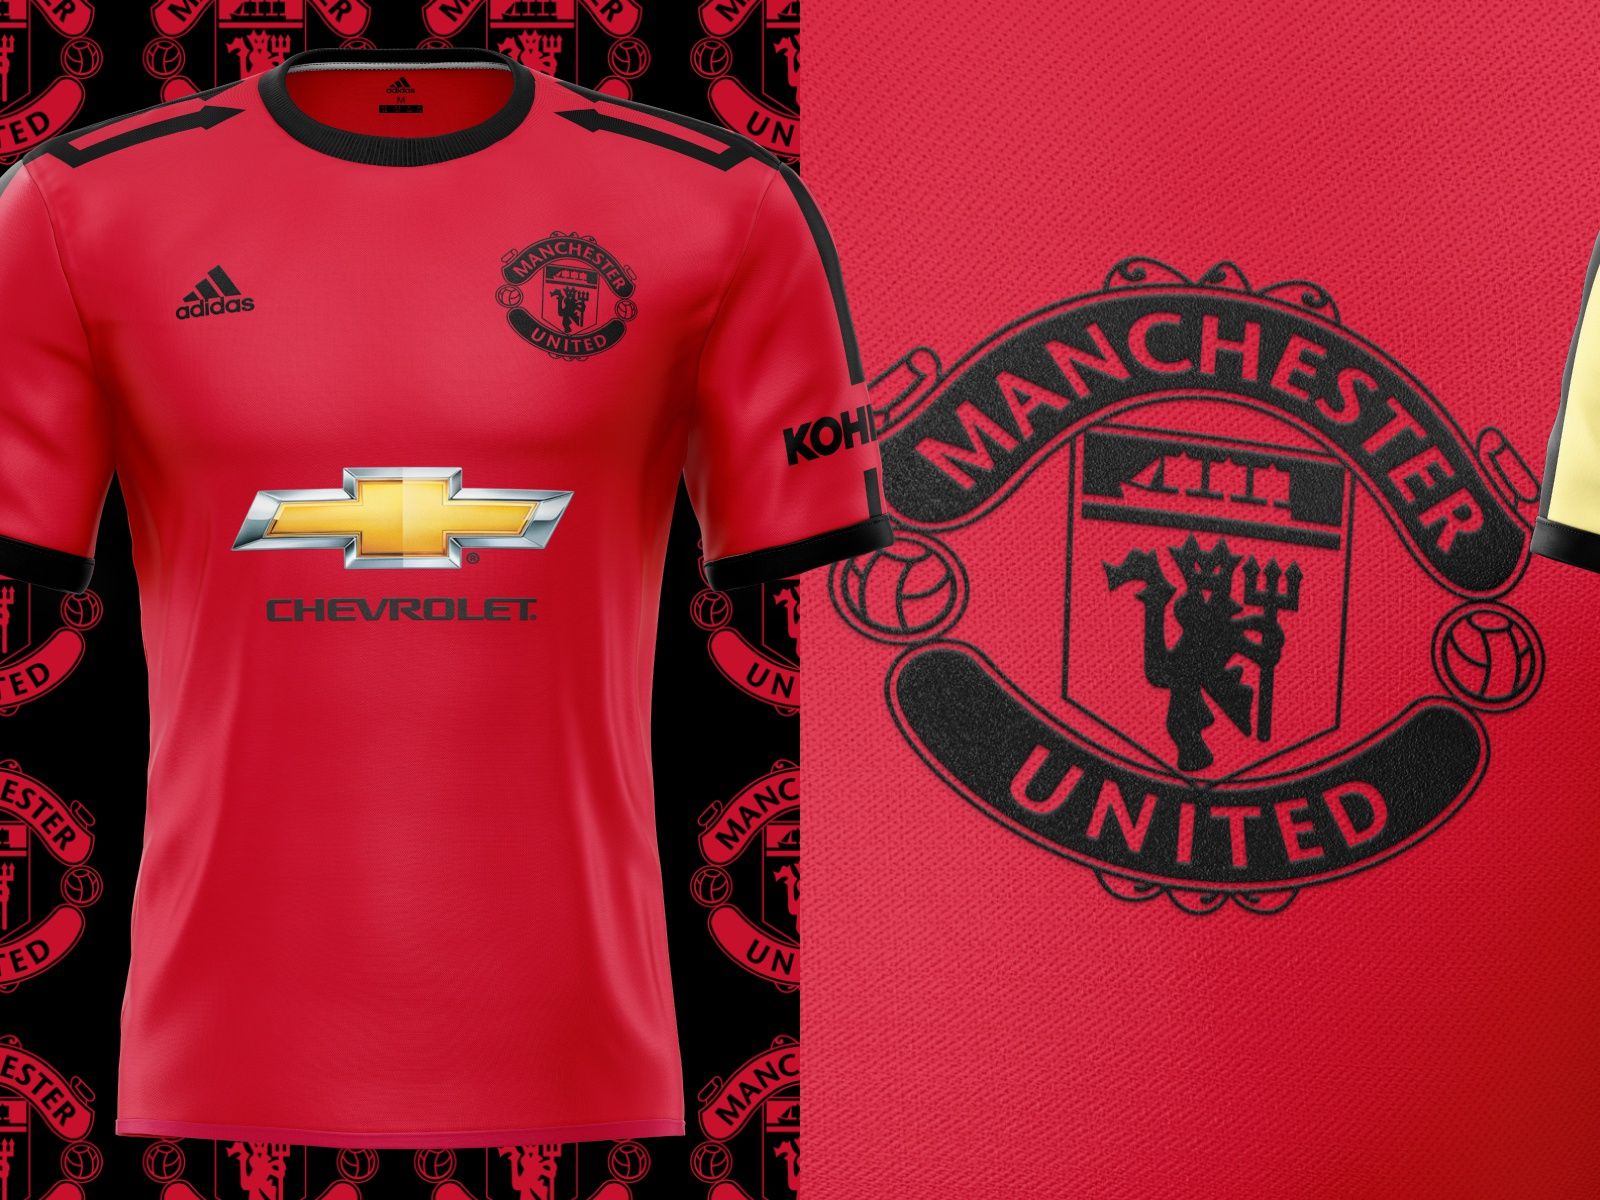 Manchester United 2021 Wallpapers - Wallpaper Cave